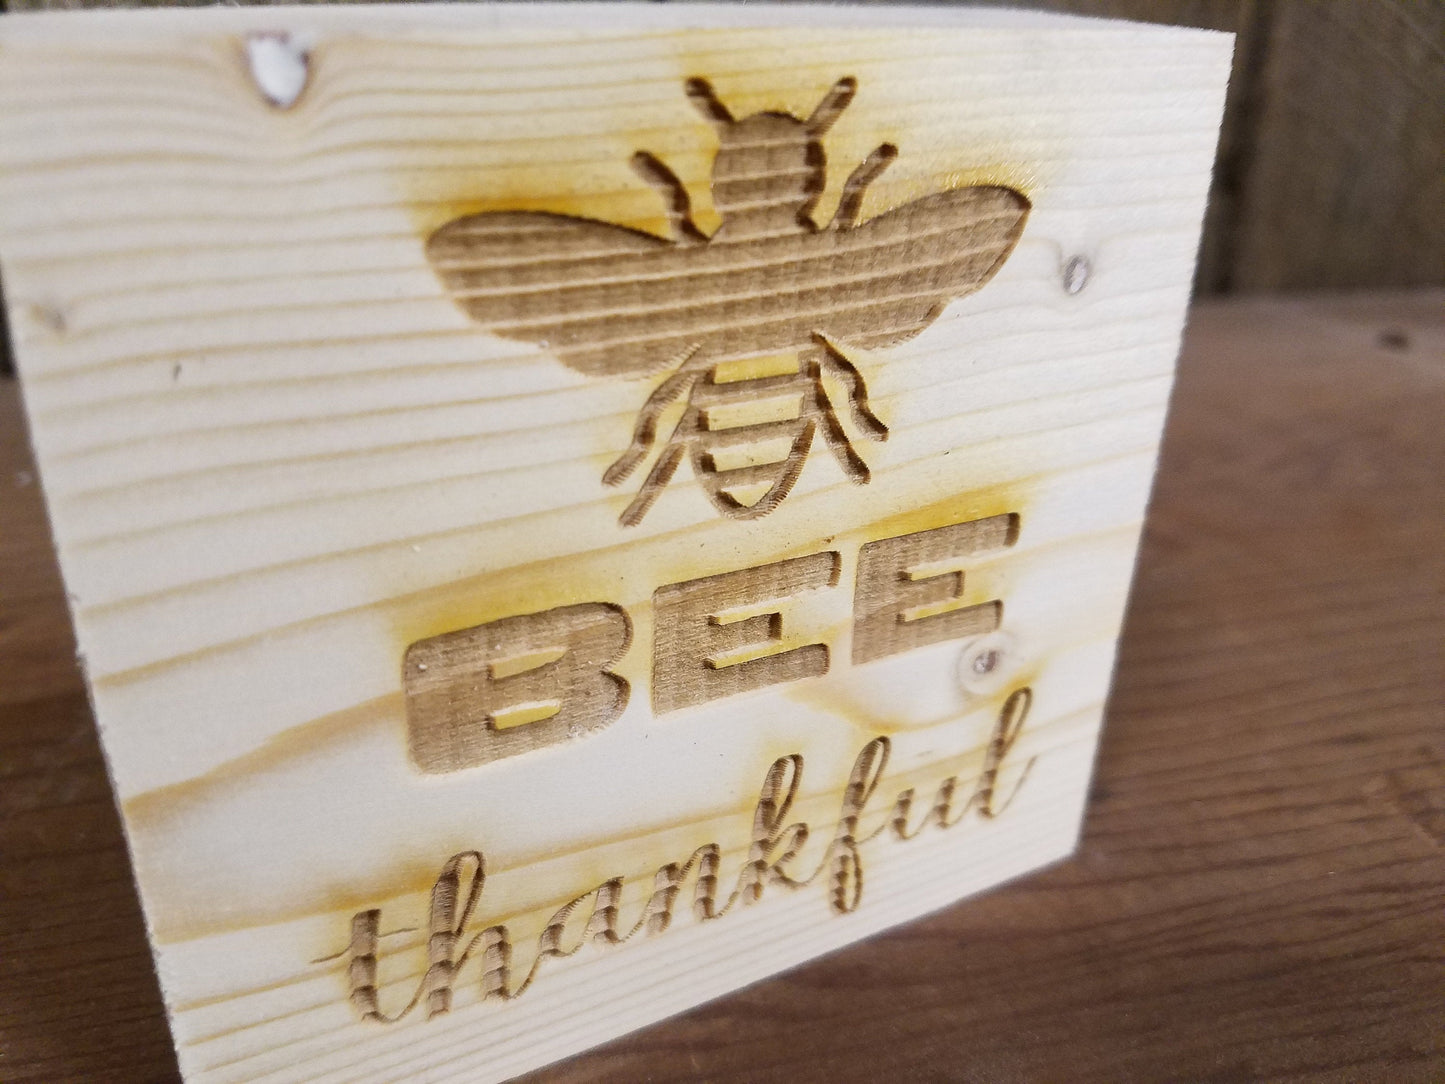 Bee Thankful, Bumble Bee, Tiered Tray Decor, Rustic, Pine, Self Sitter,  Handmade Sign, Wood, Laser Engraved, Primitive